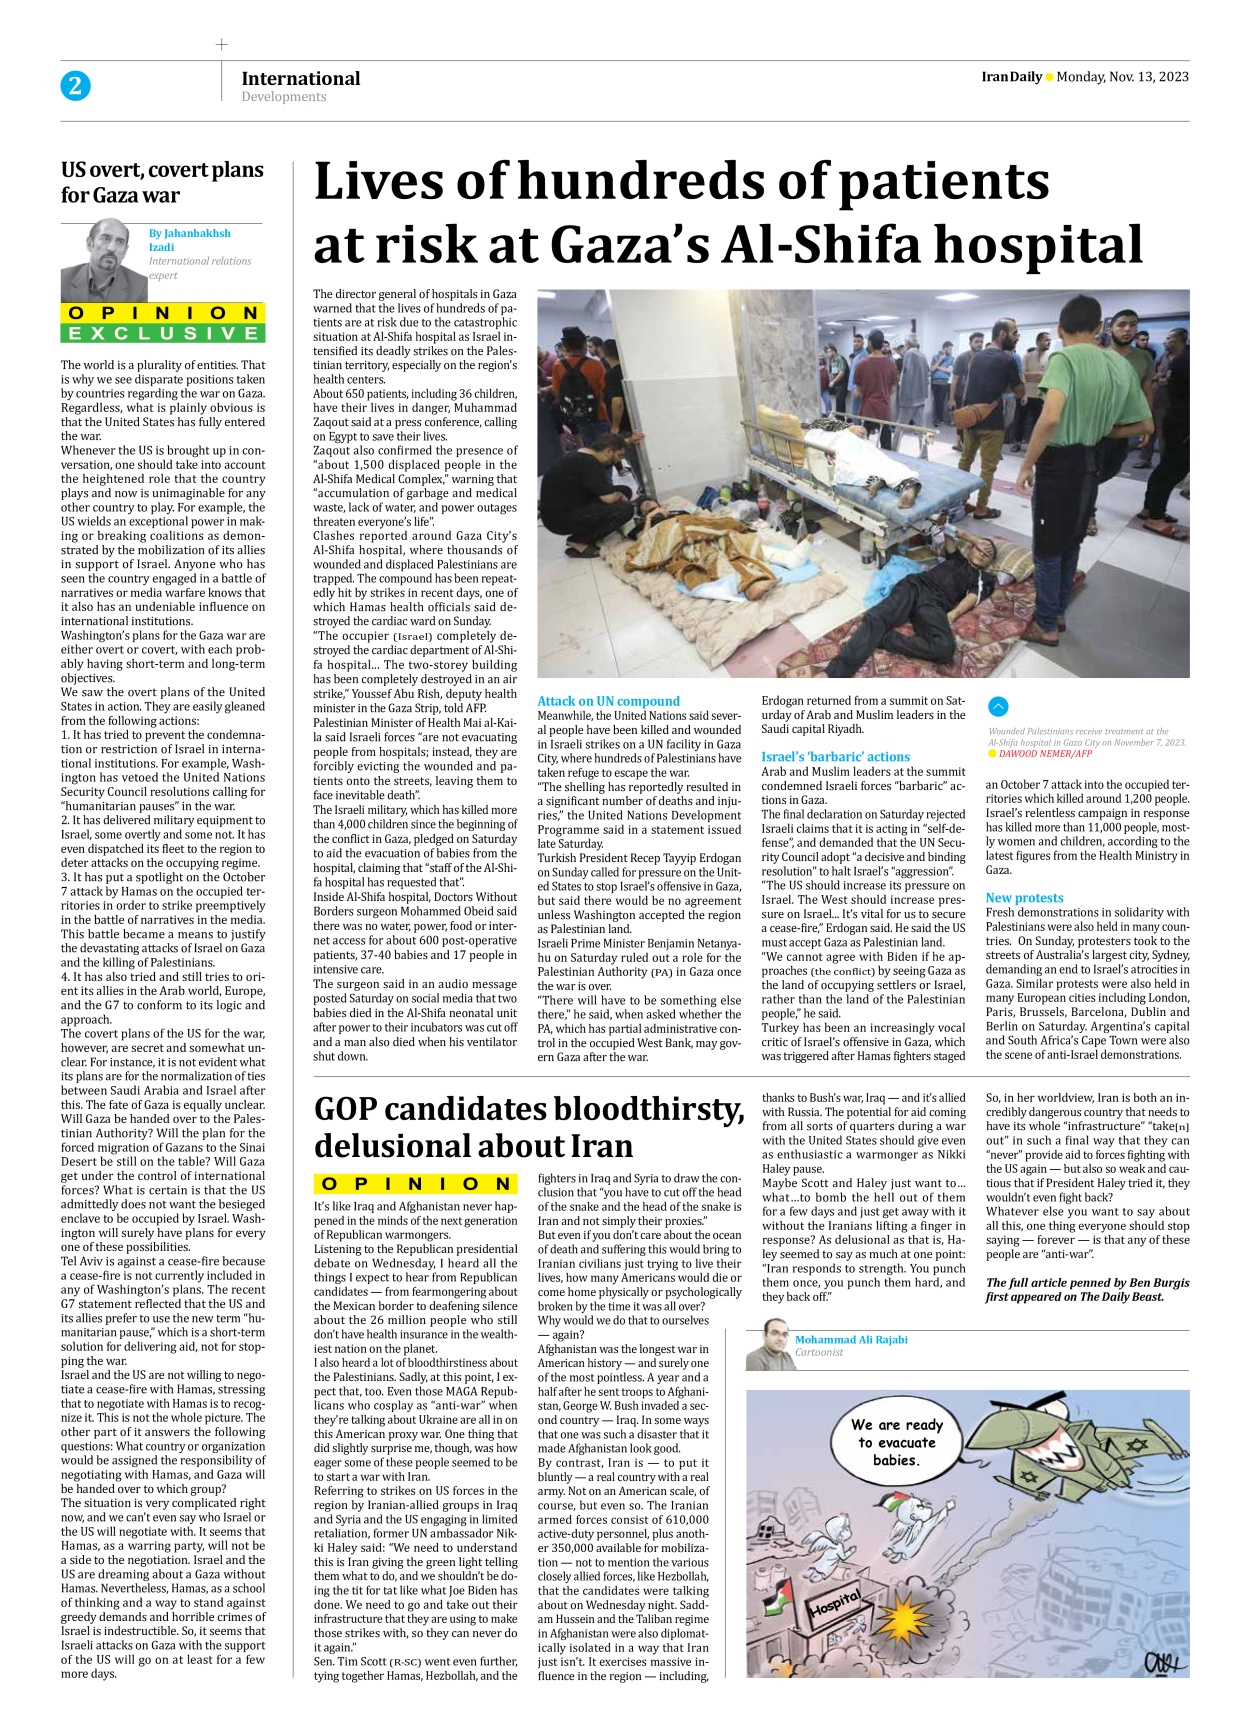 Iran Daily - Number Seven Thousand Four Hundred and Thirty Three - 13 November 2023 - Page 2